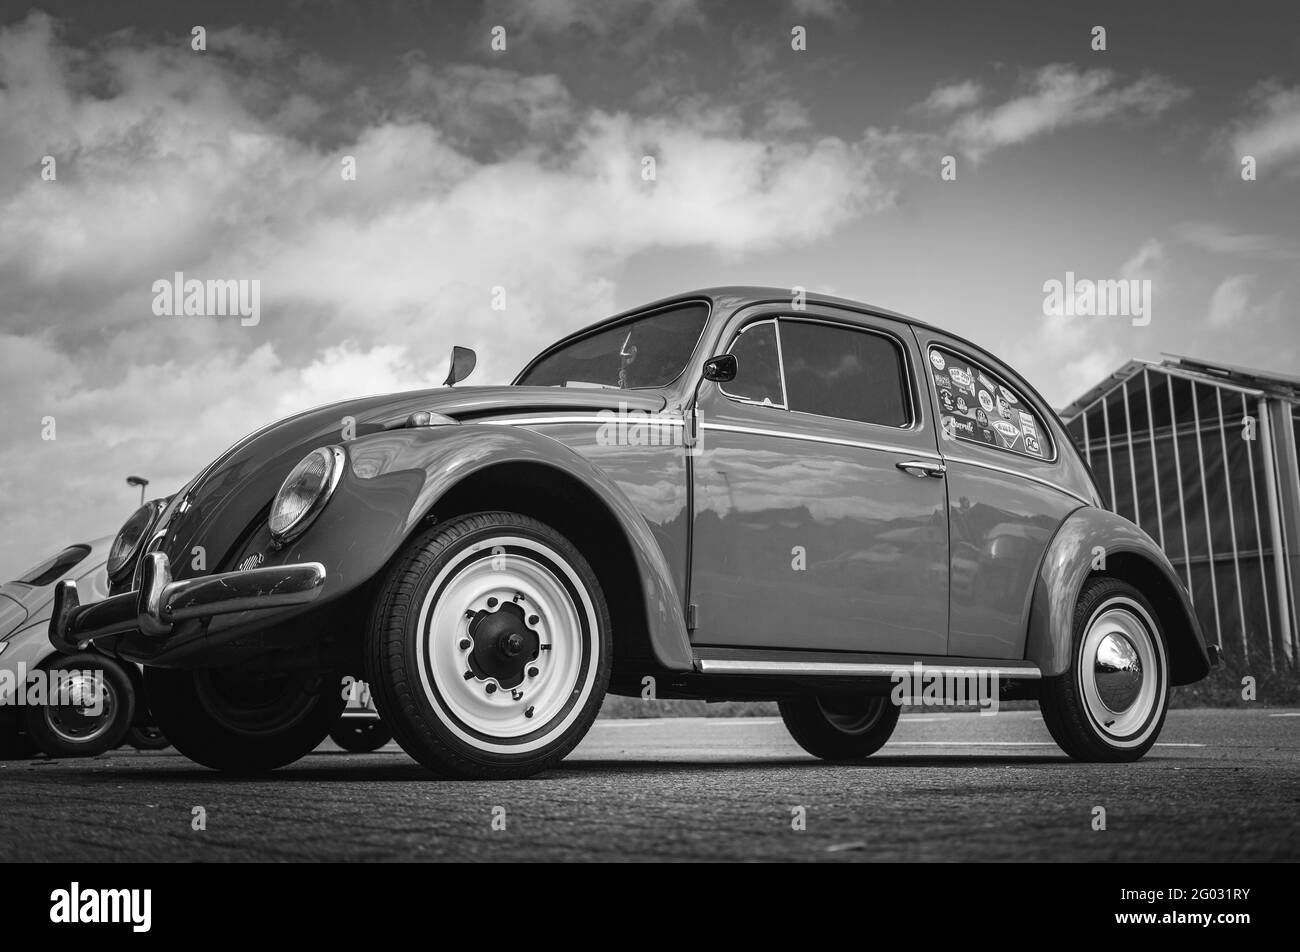 ZOETERMEER, NETHERLANDS - May 20, 2021: Retro car Volkswagen Beetle low to the ground black and white shot Stock Photo